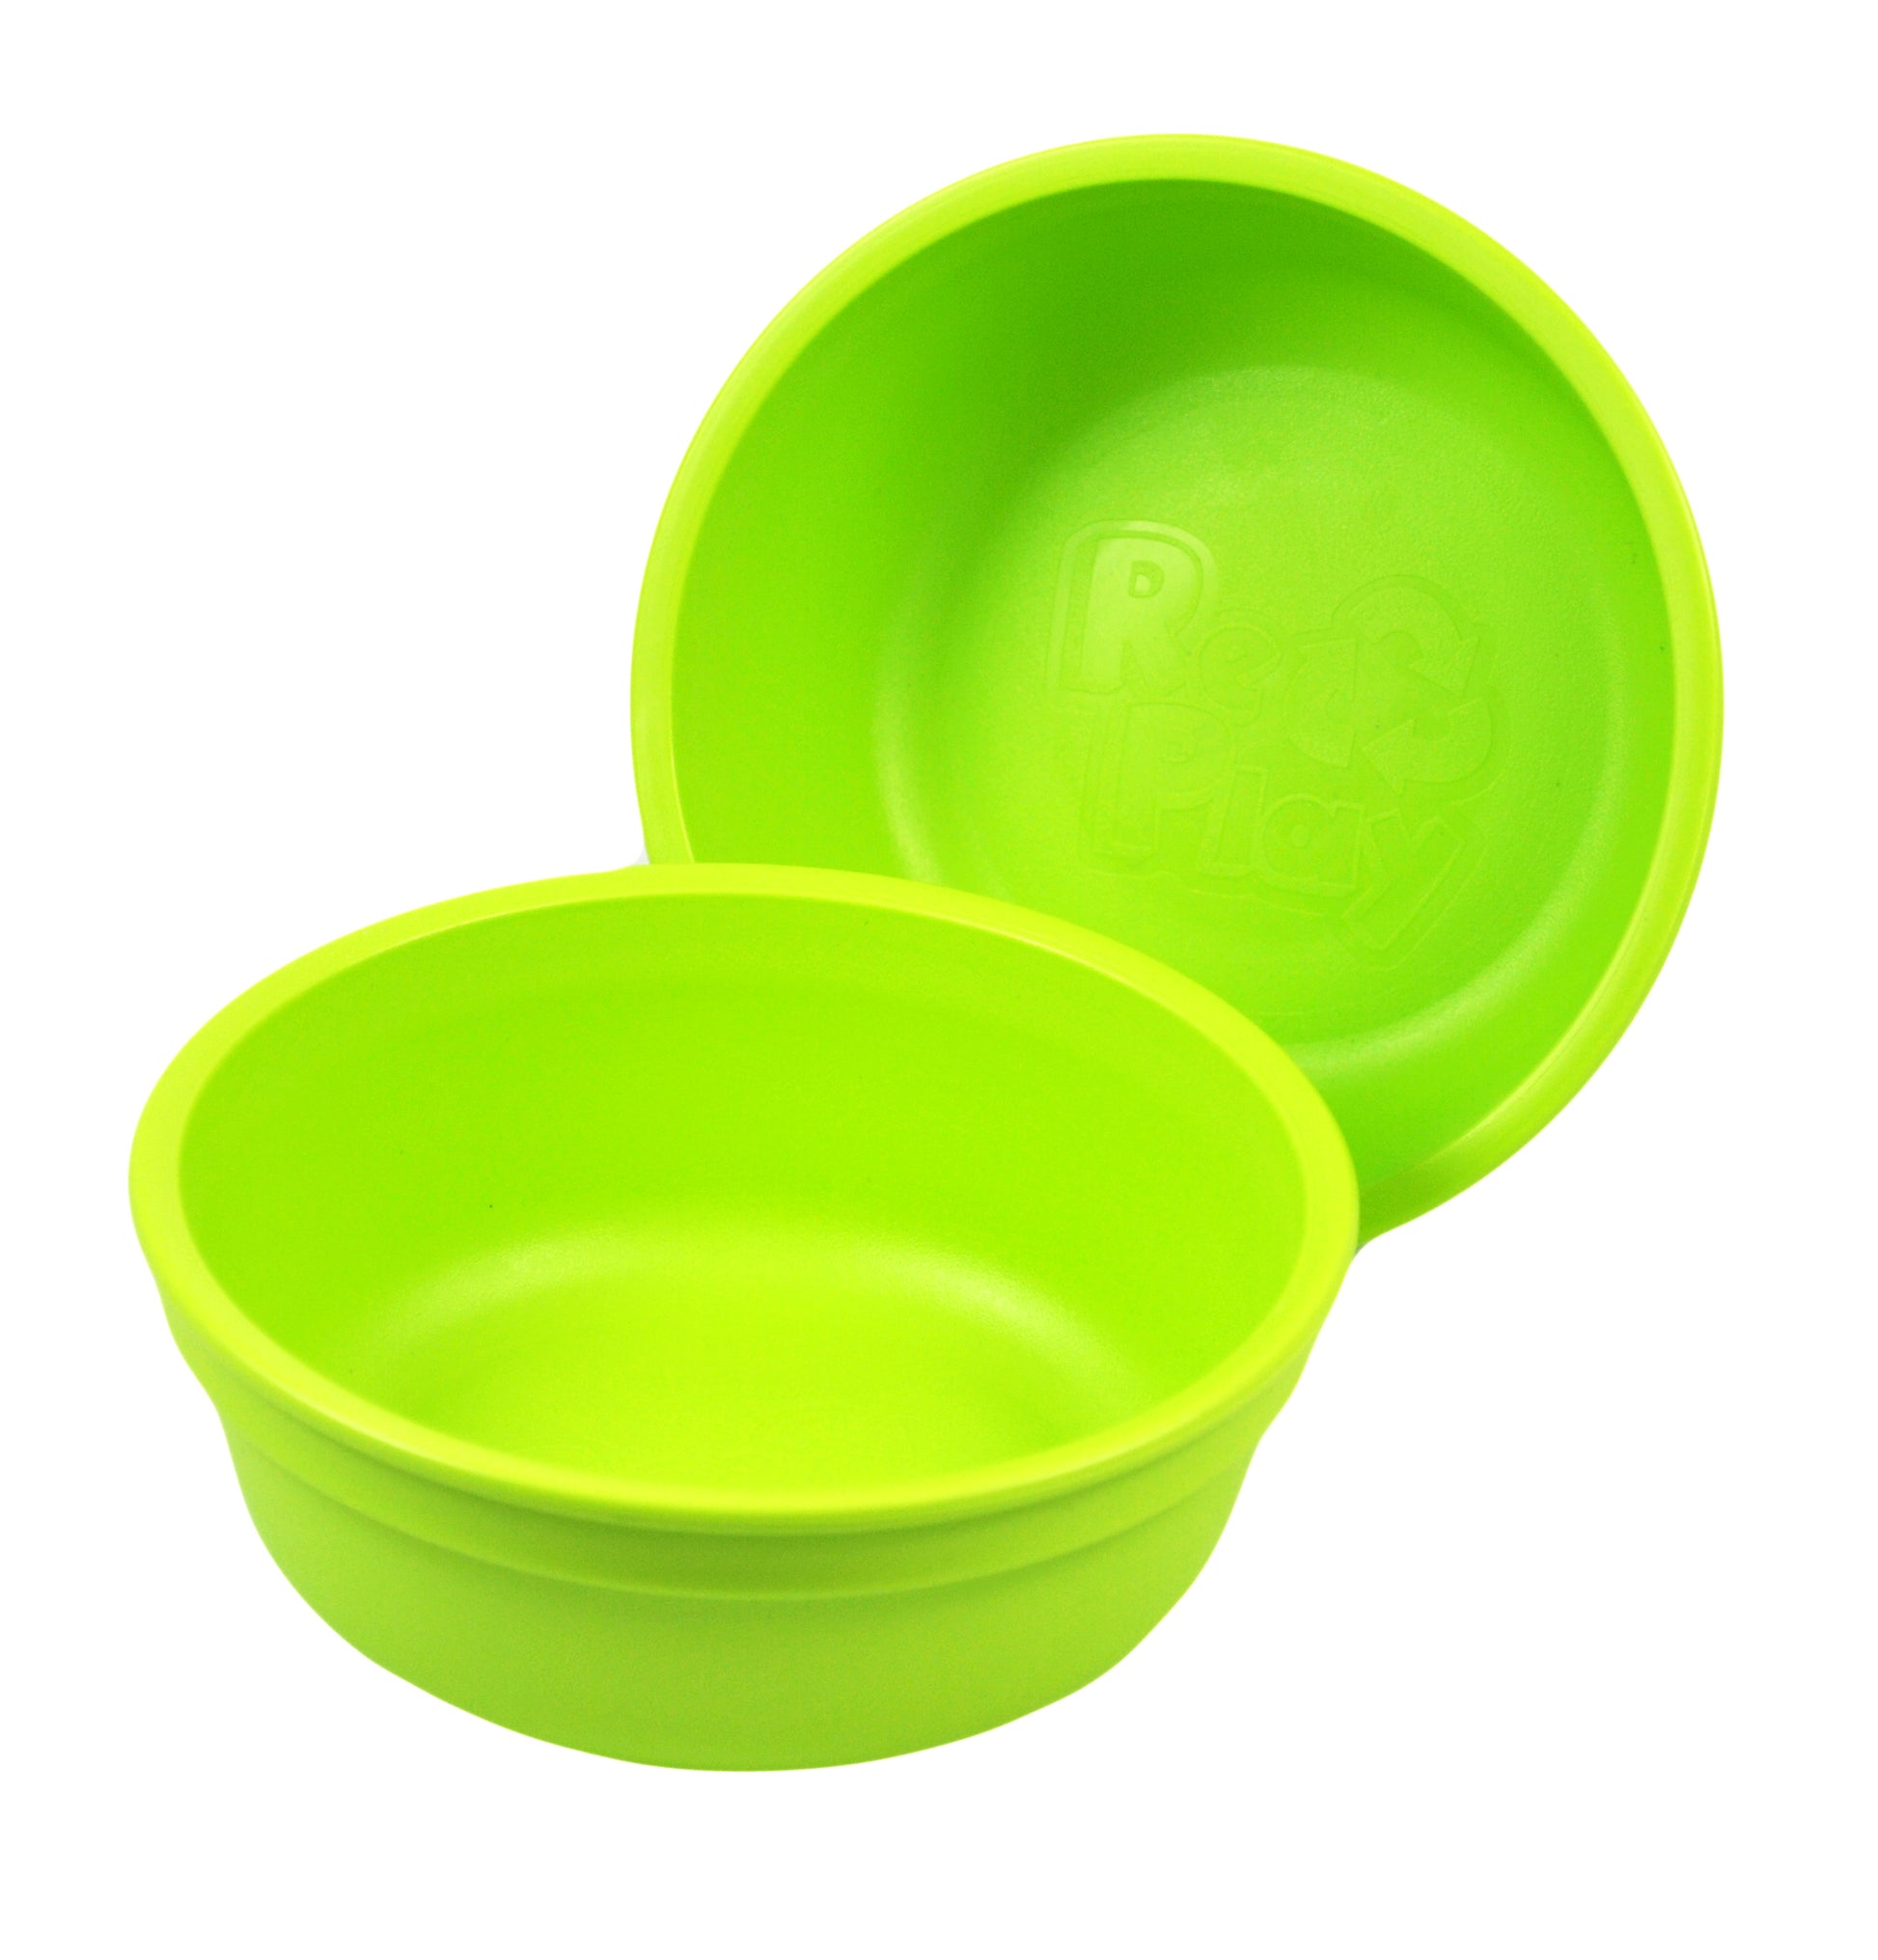 Re-Play Bowl | Standard Size in Lime Green from Bear & Moo